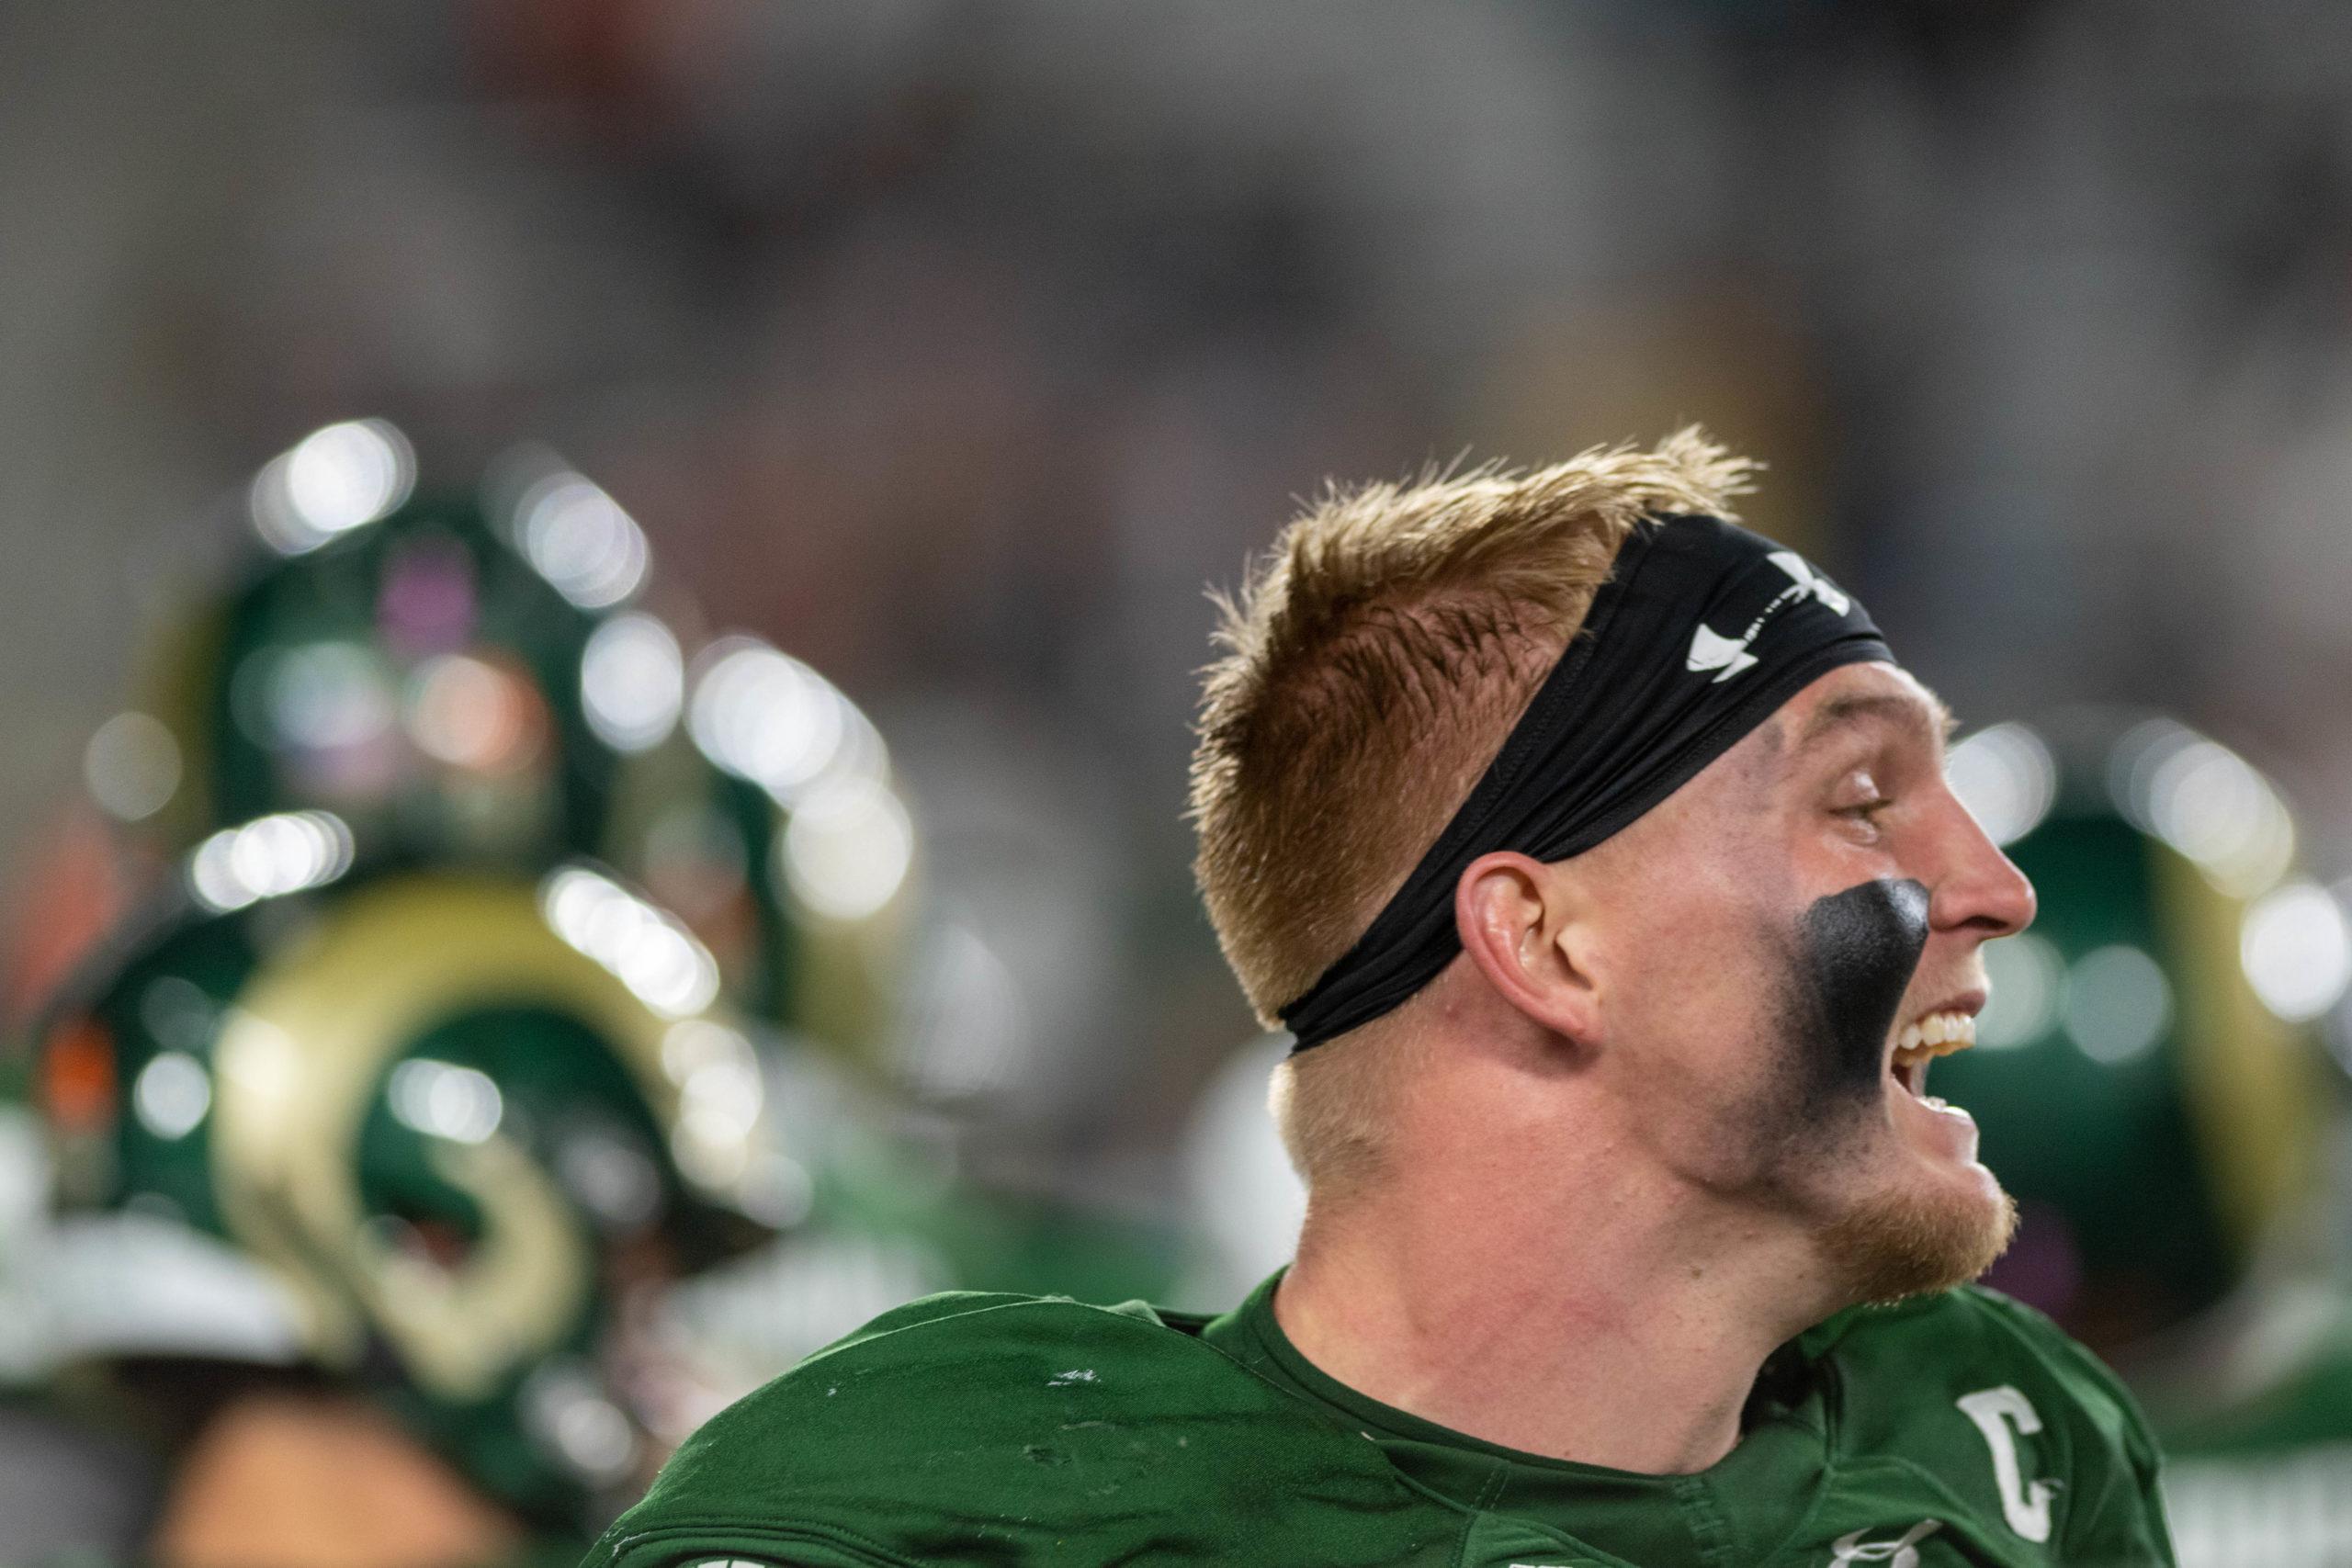 Trey McBride (85) celebrates on the sideline after the Colorado State University football team scored another touchdown during the game against Boise State University Ocy. 30th.